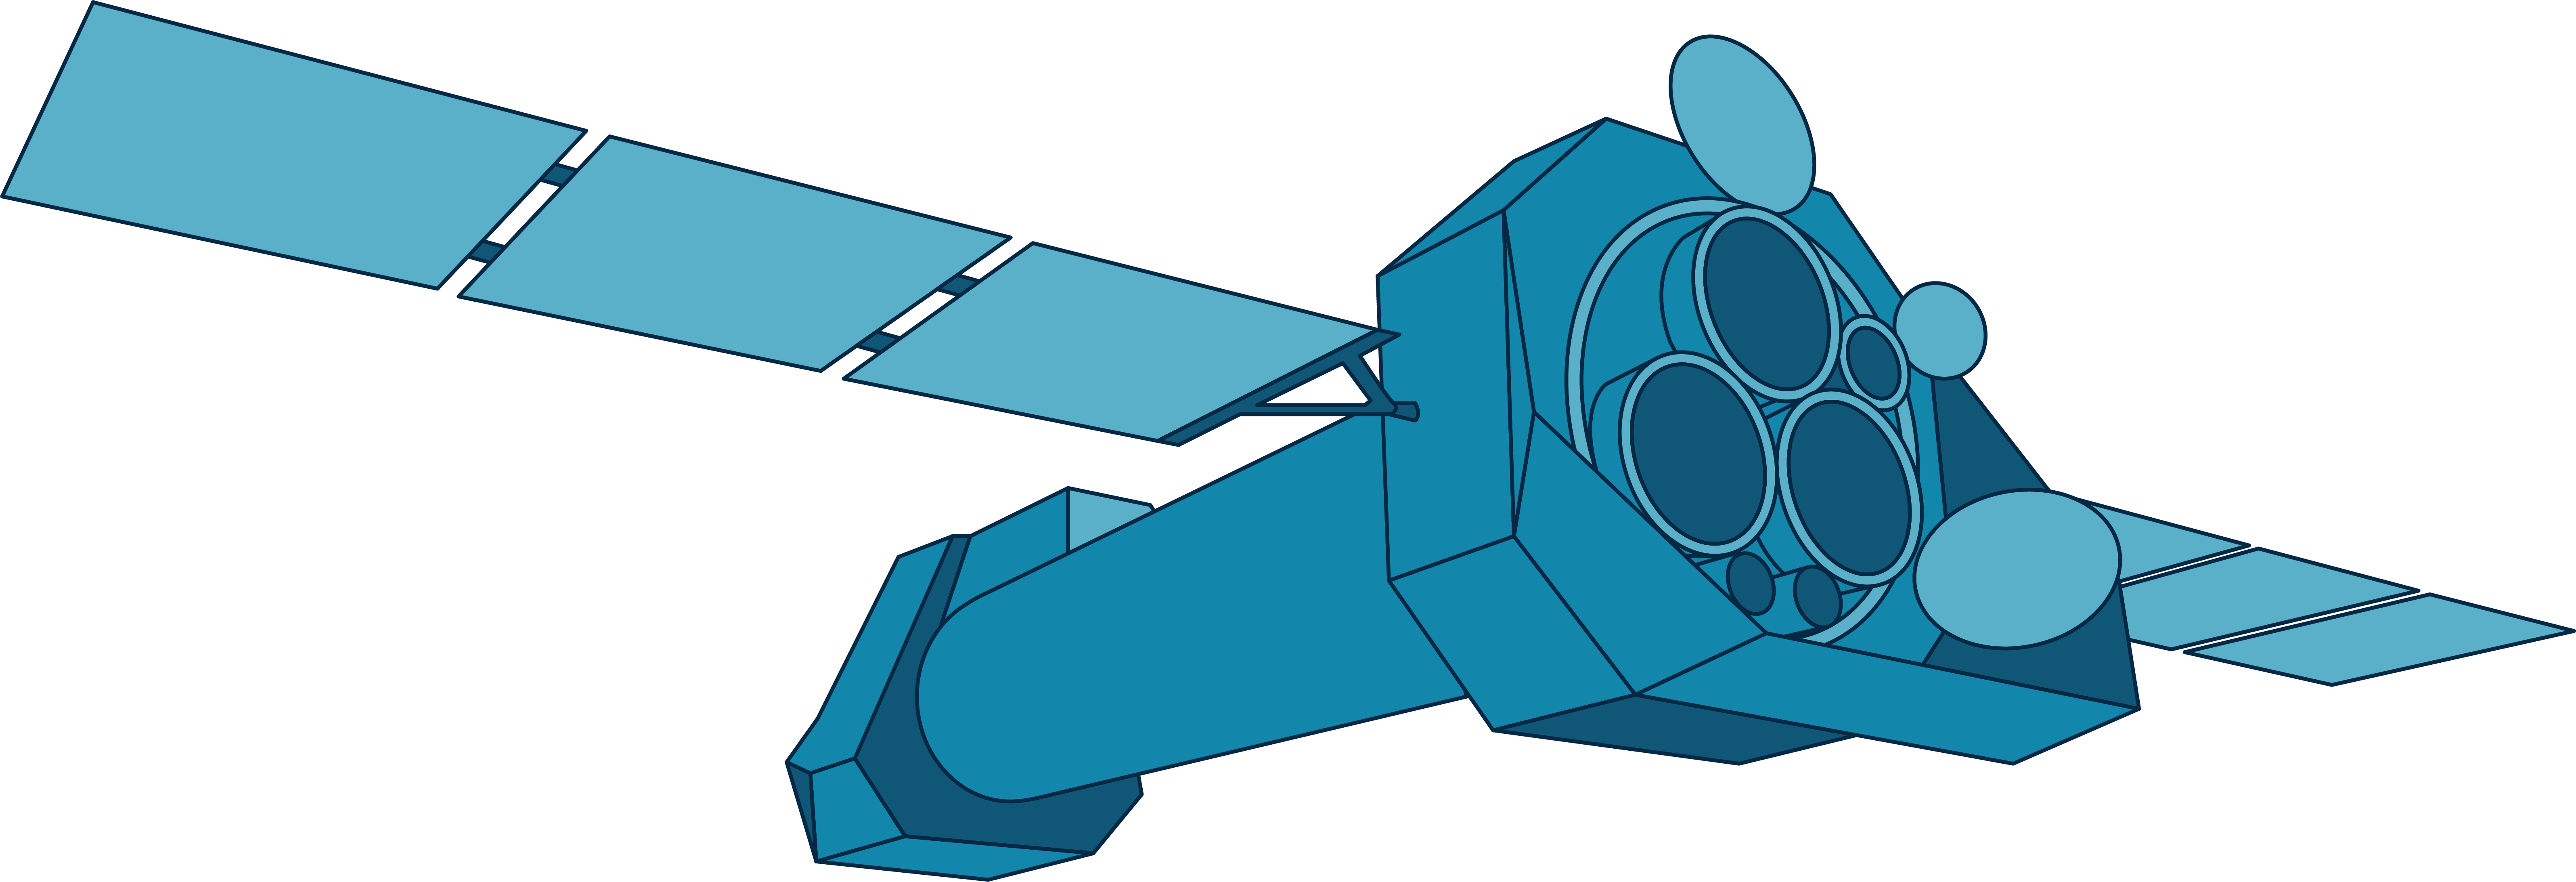 This illustration shows ESA's XMM-Newton observatory in shades of blue. Overall, the craft is dragonfly-shaped with a long, cylindrical body and an open "head" from which two solar array "wings" extend.